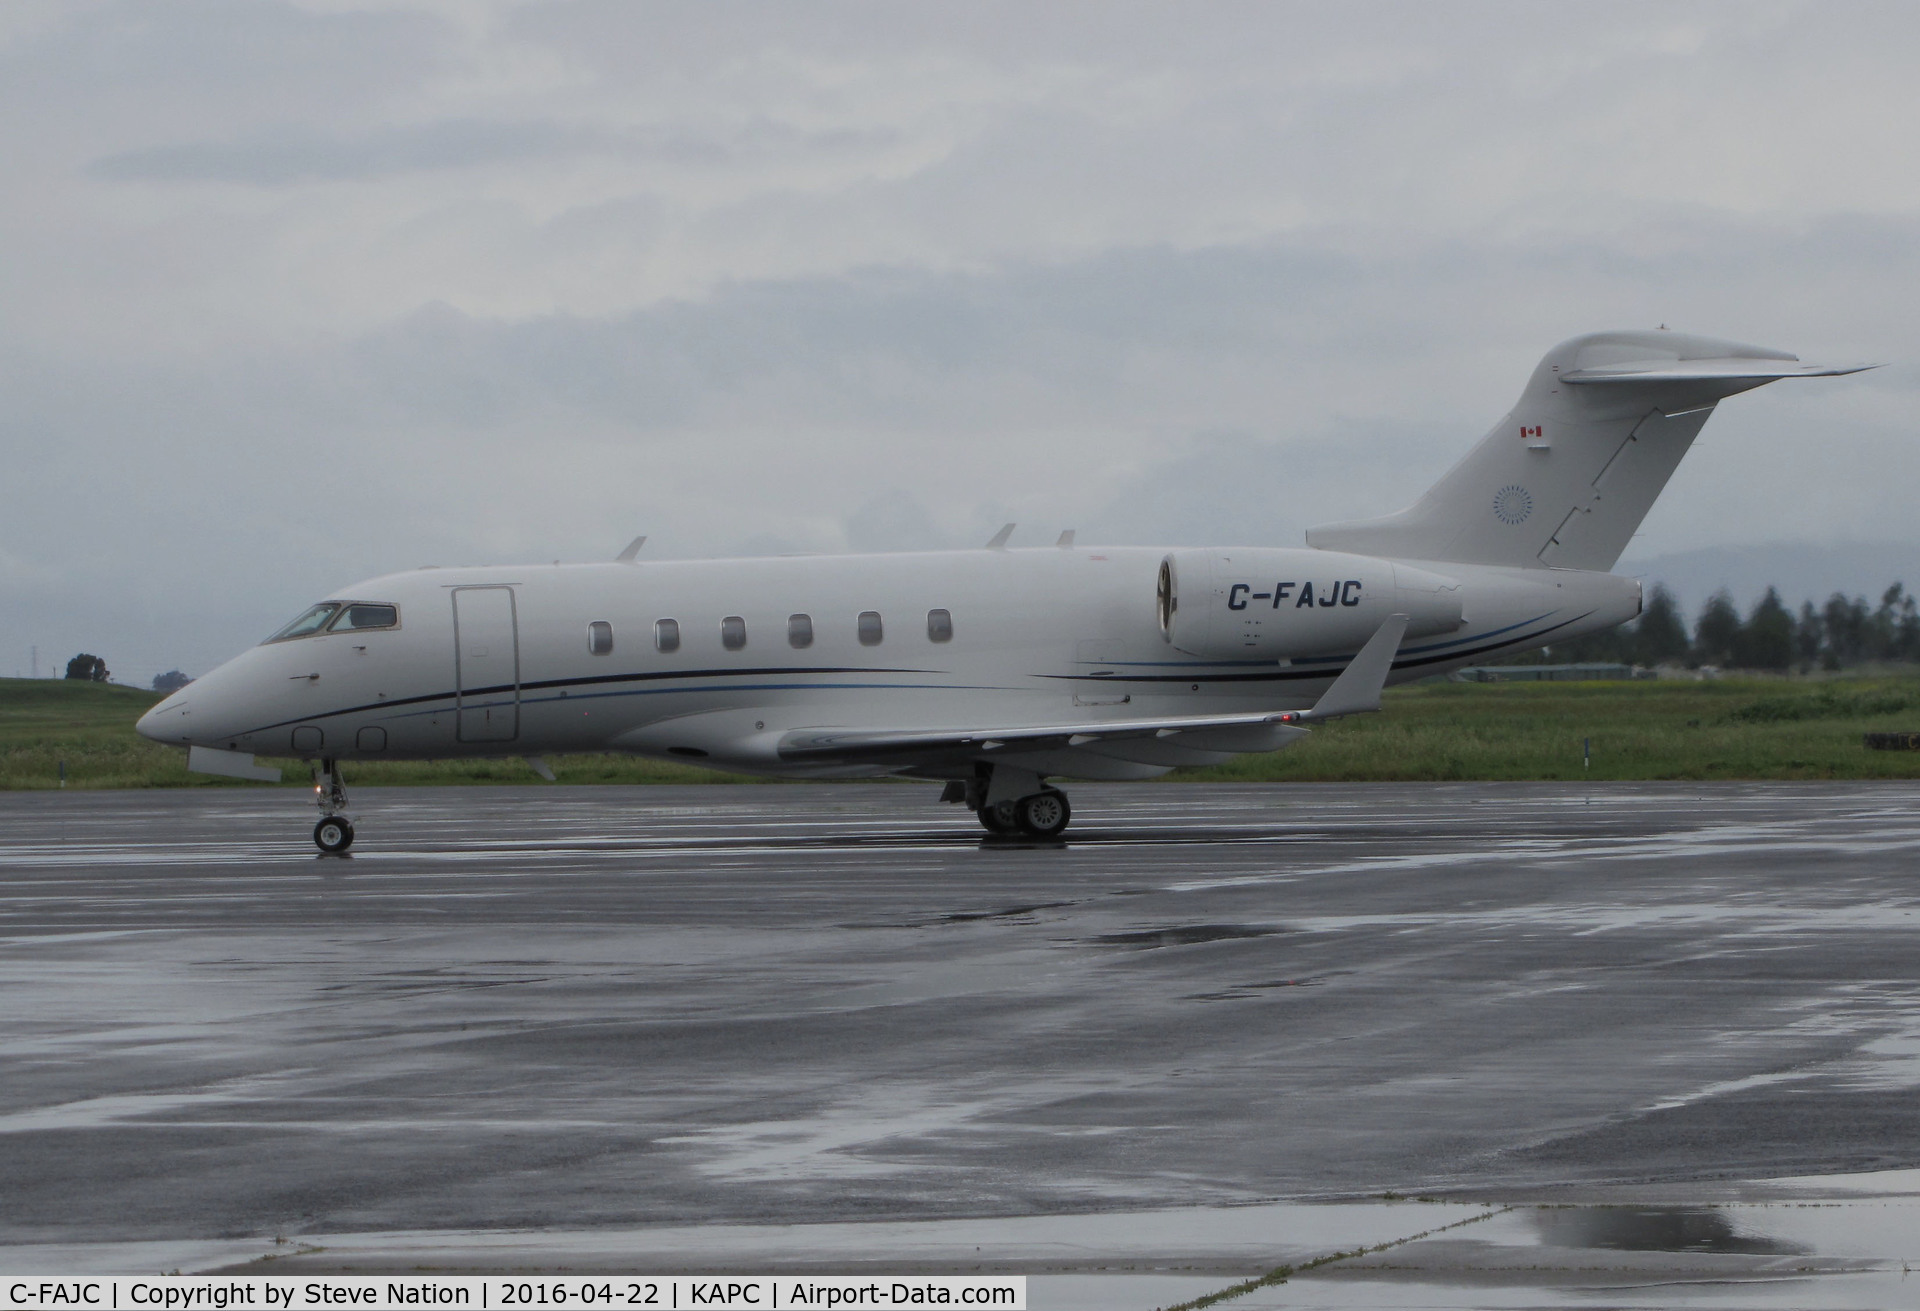 C-FAJC, 2013 Bombardier Challenger 300 (BD-100-1A10) C/N 20384, Morningstar Partners Ltd 2013 Bombardier Challenger 300 (BD-100-1A10) arriving on a rainy morning @ Napa County Airport, CA